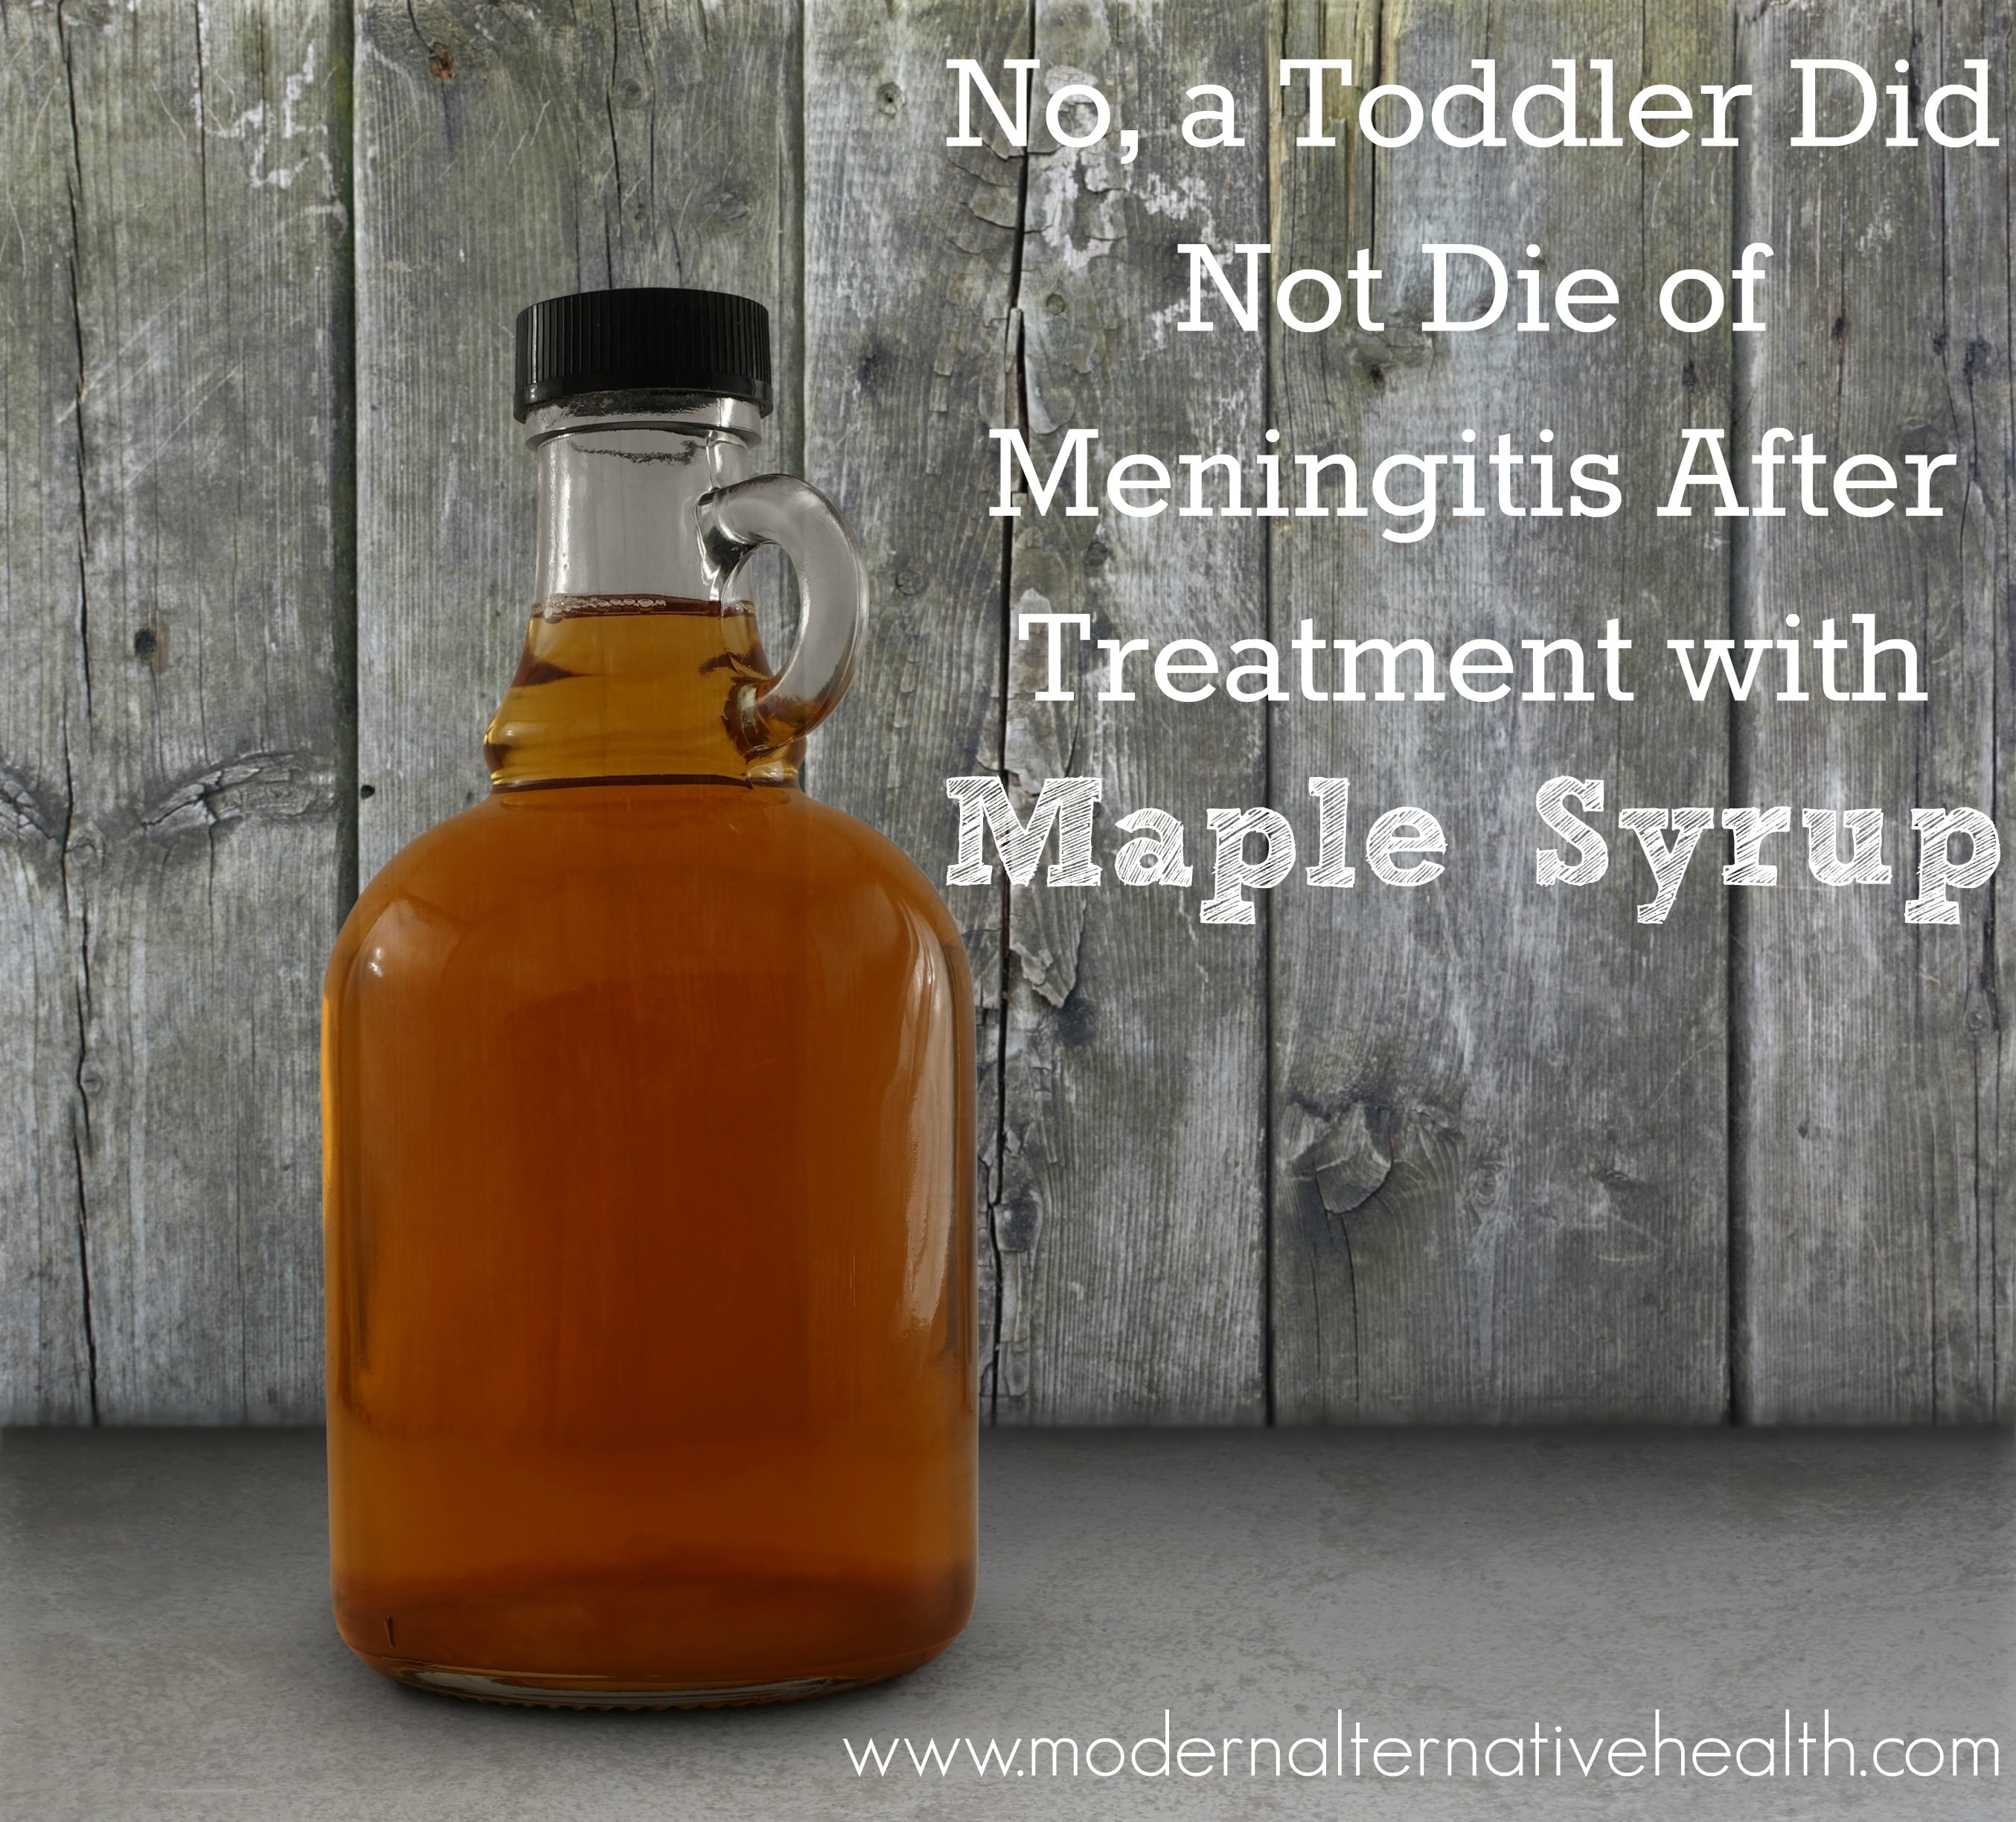 No, a Toddler Did Not Die of Meningitis After Treatment with Maple Syrup